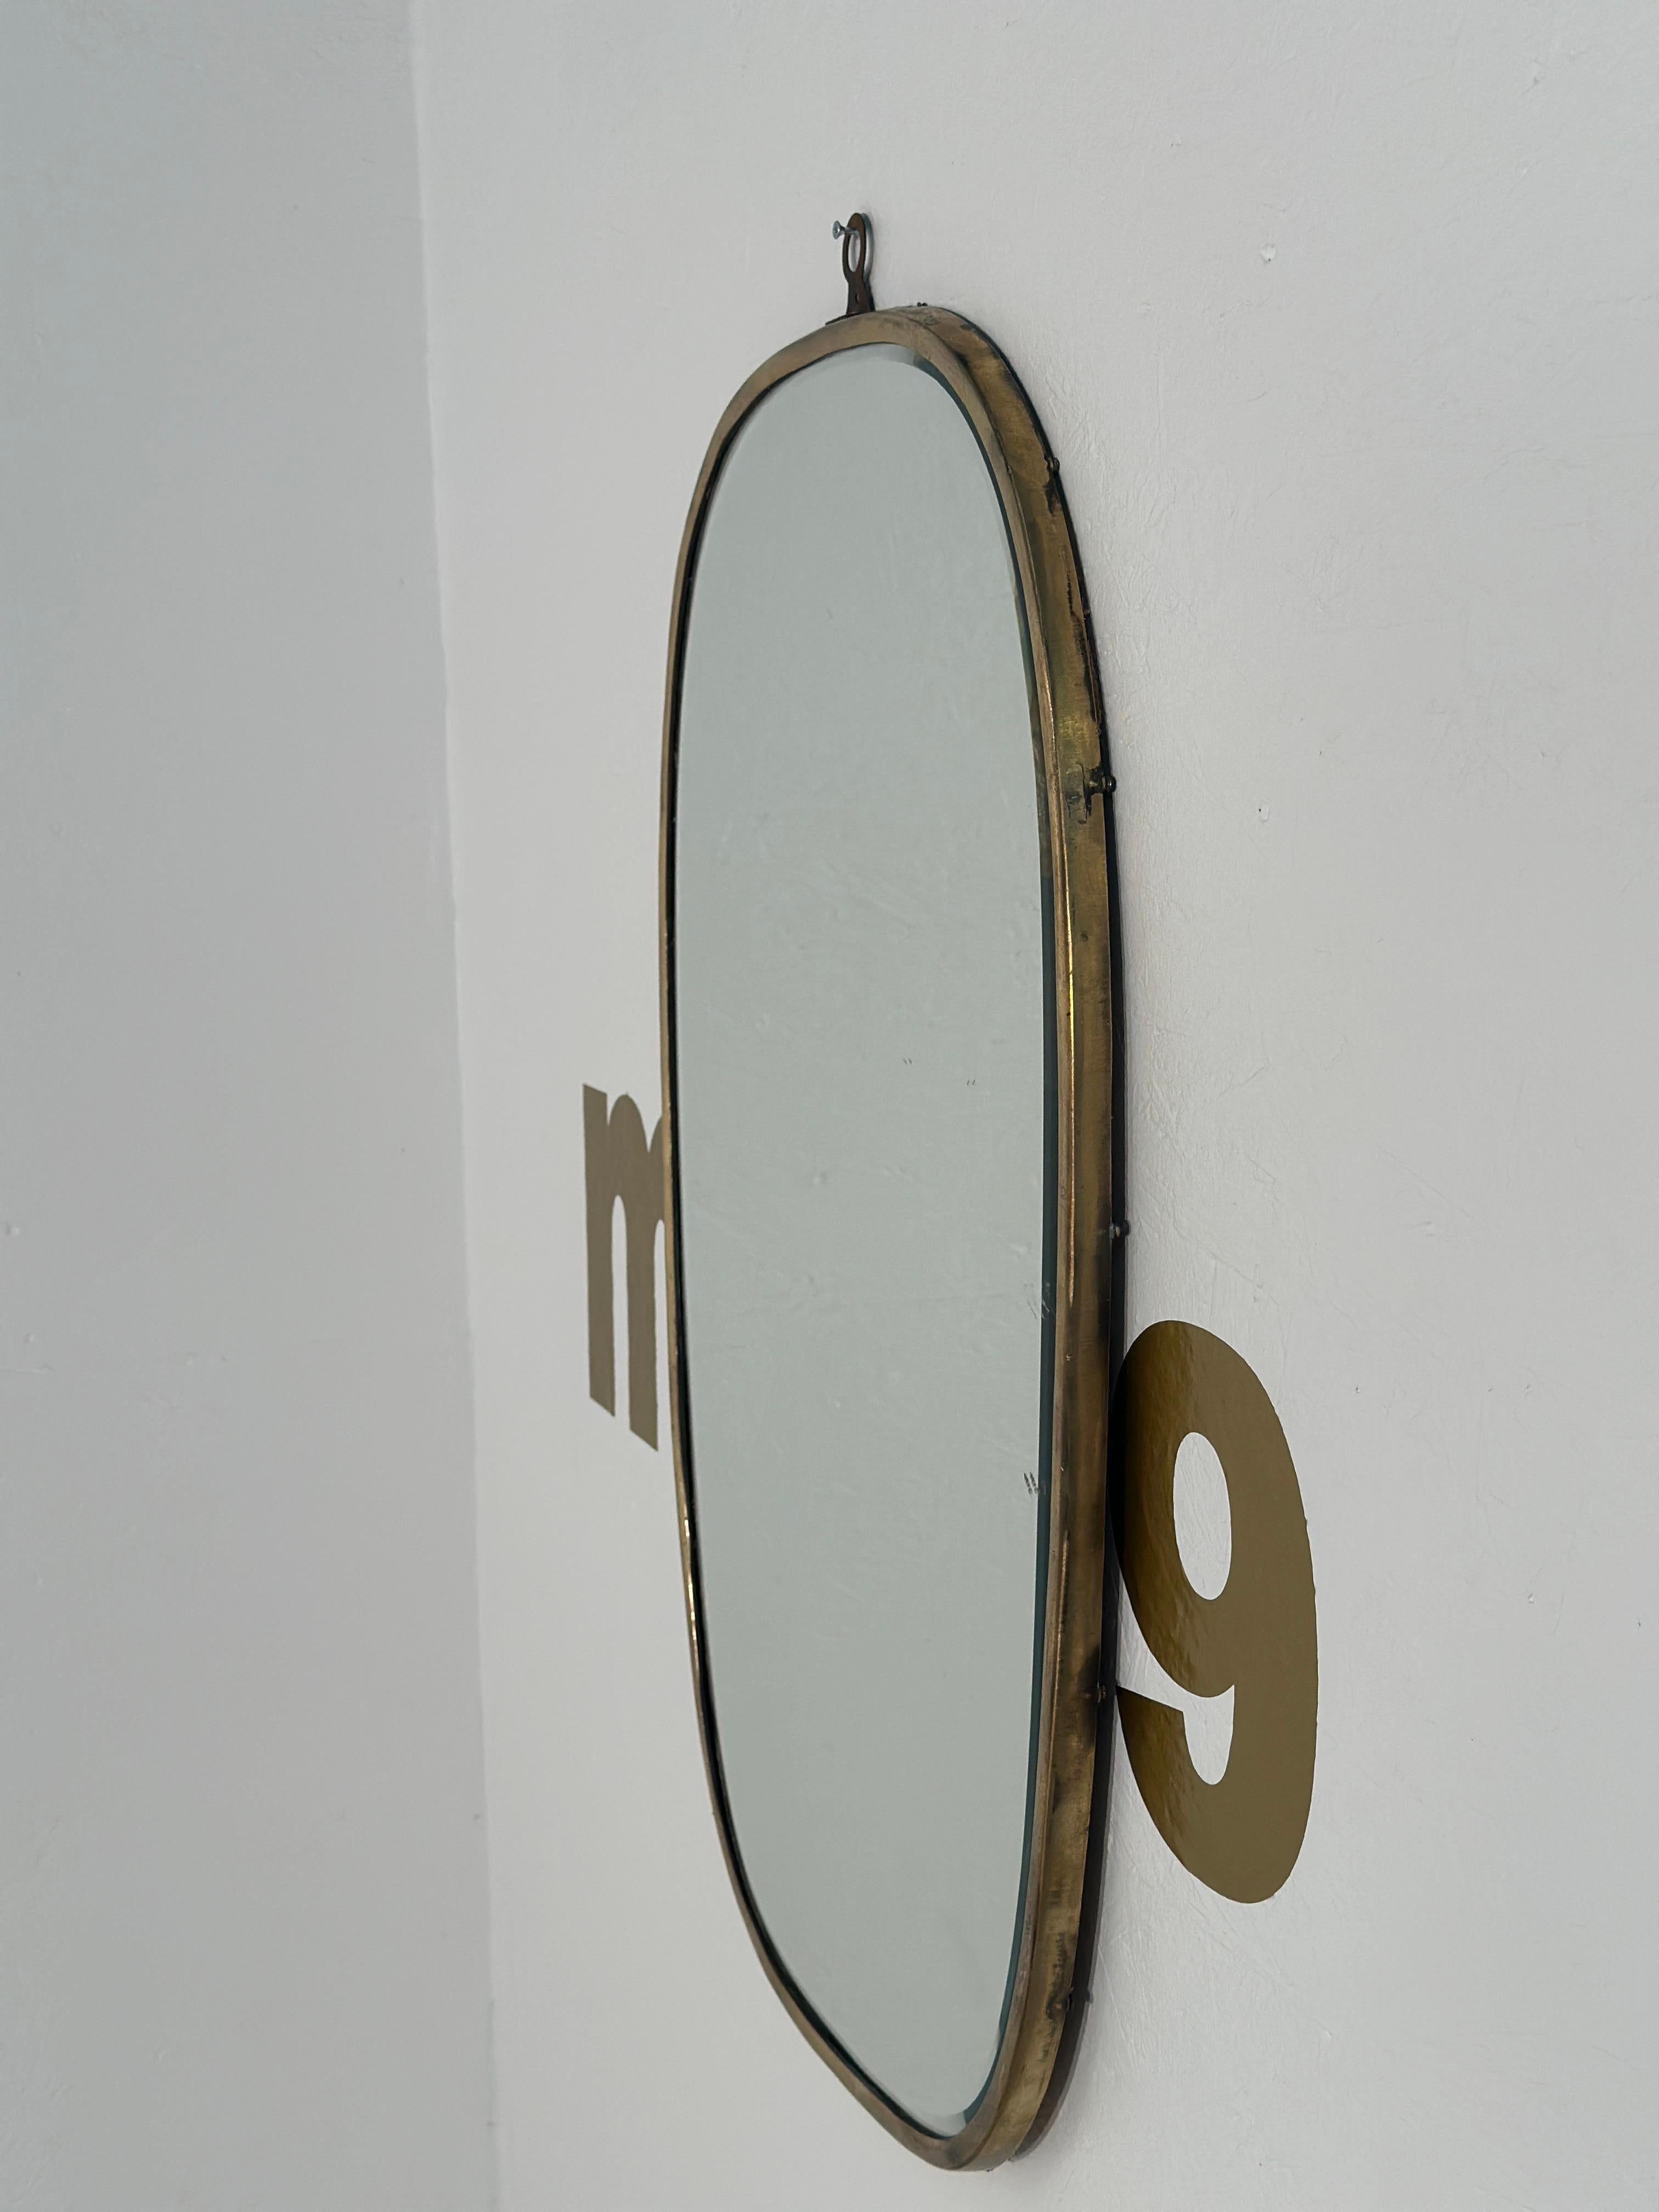 A Vintage Italian Semi-Oval Wall Mirror from the 1970s boasts a sleek and stylish design, featuring a semi-oval shape that captures the essence of Italian sophistication and craftsmanship prevalent during that era.

